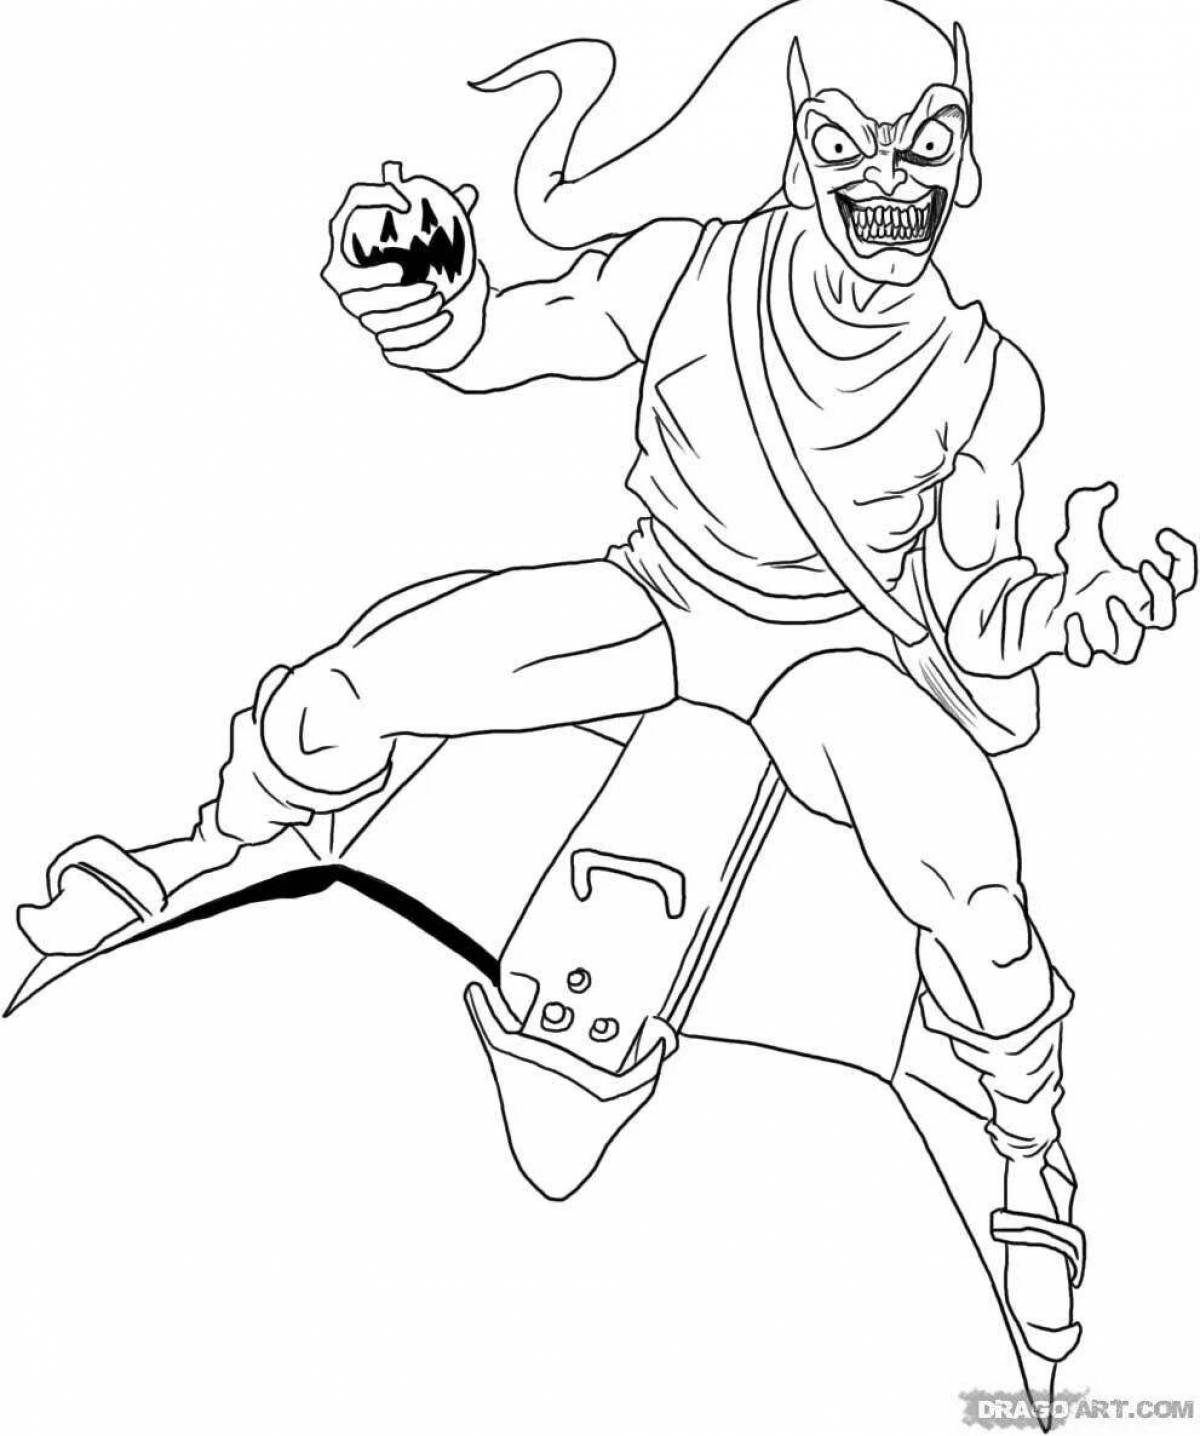 Majestic spider-man and goblin coloring page